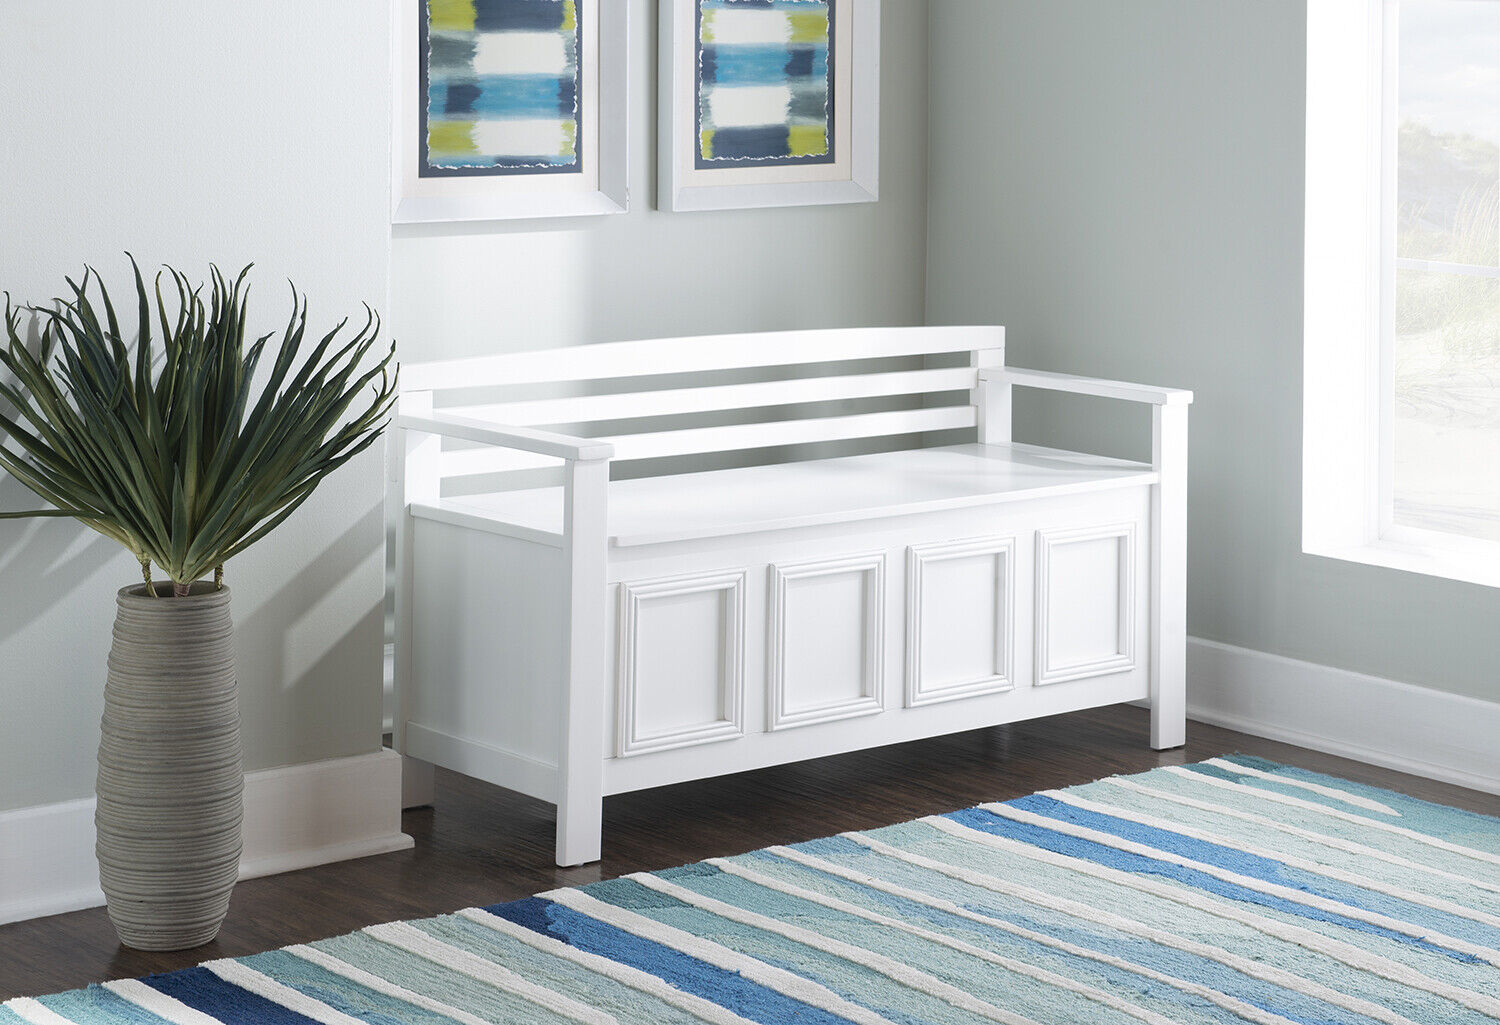 Modern Decorative Storage Bench Flip-top Lid Large Compartment Foyer Seat White